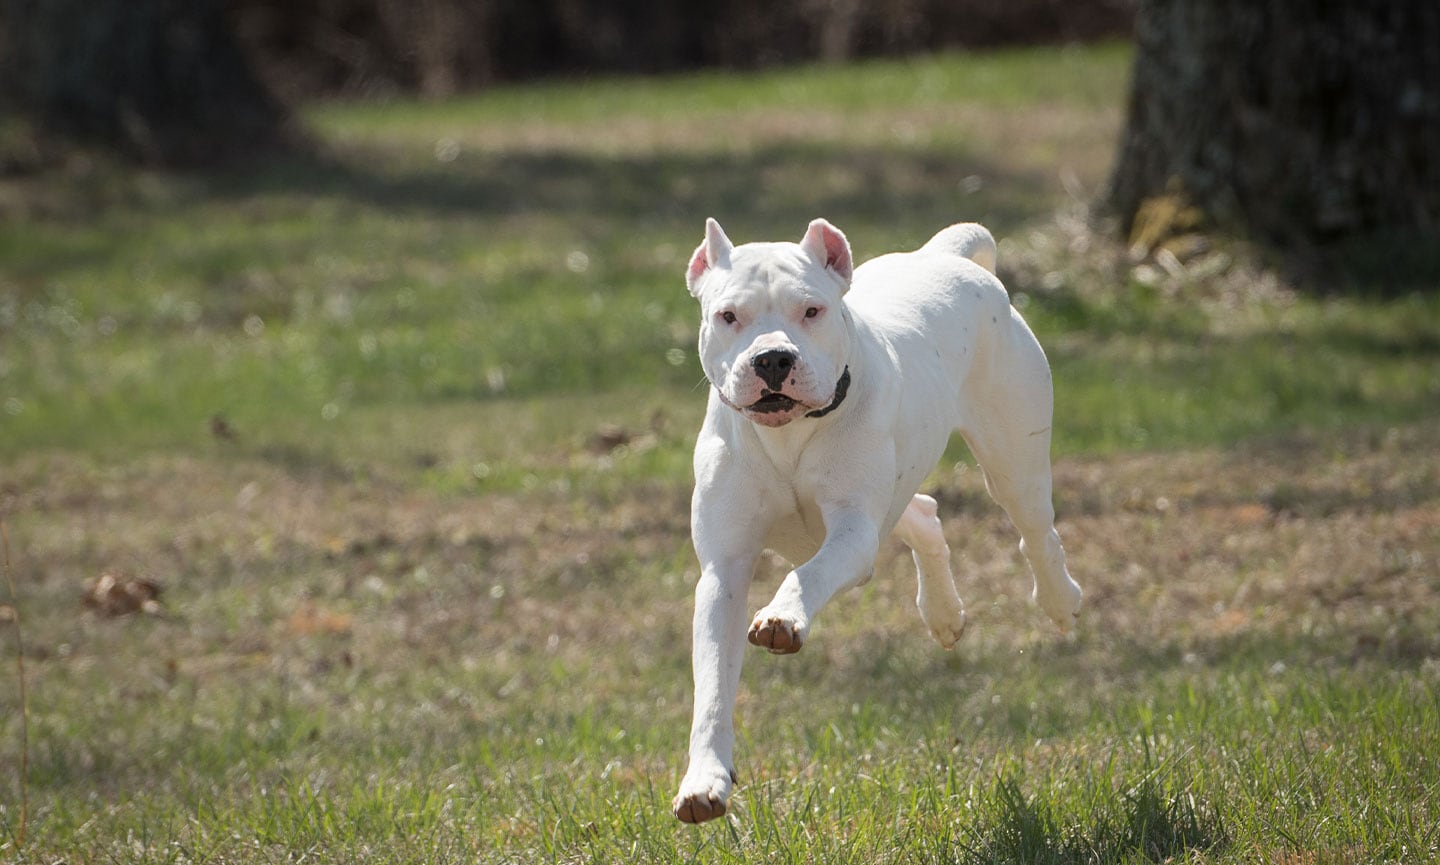 https://media-be.chewy.com/wp-content/uploads/2021/06/02120036/Dogo-Argentino-FeaturedImage.jpg